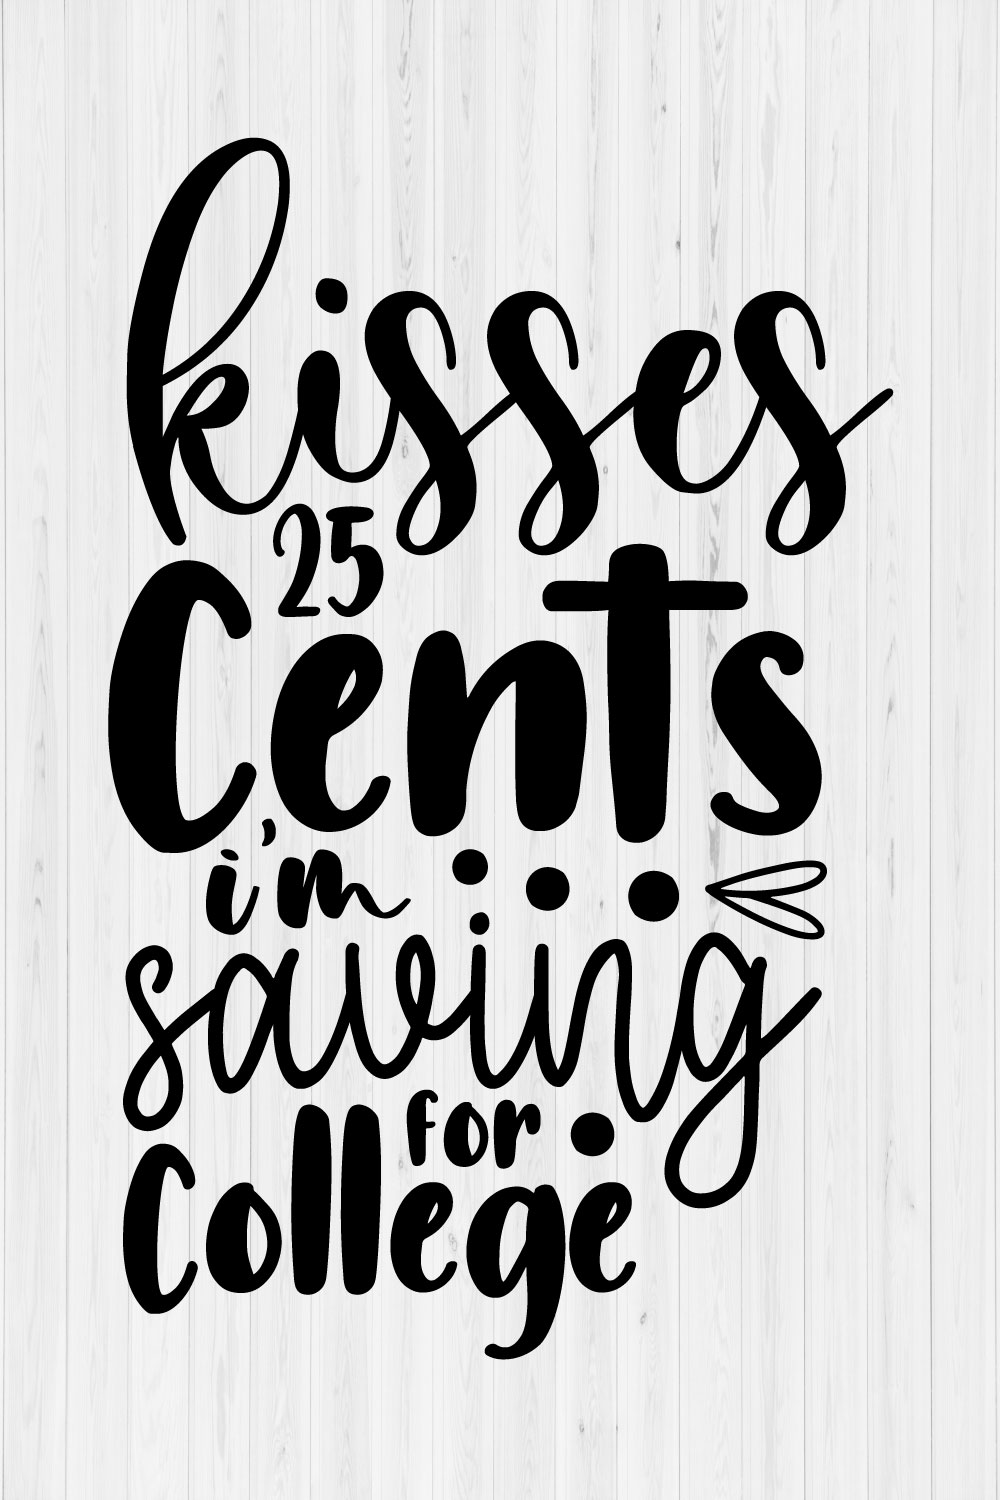 kisses 25 cents i'm saving for college pinterest preview image.